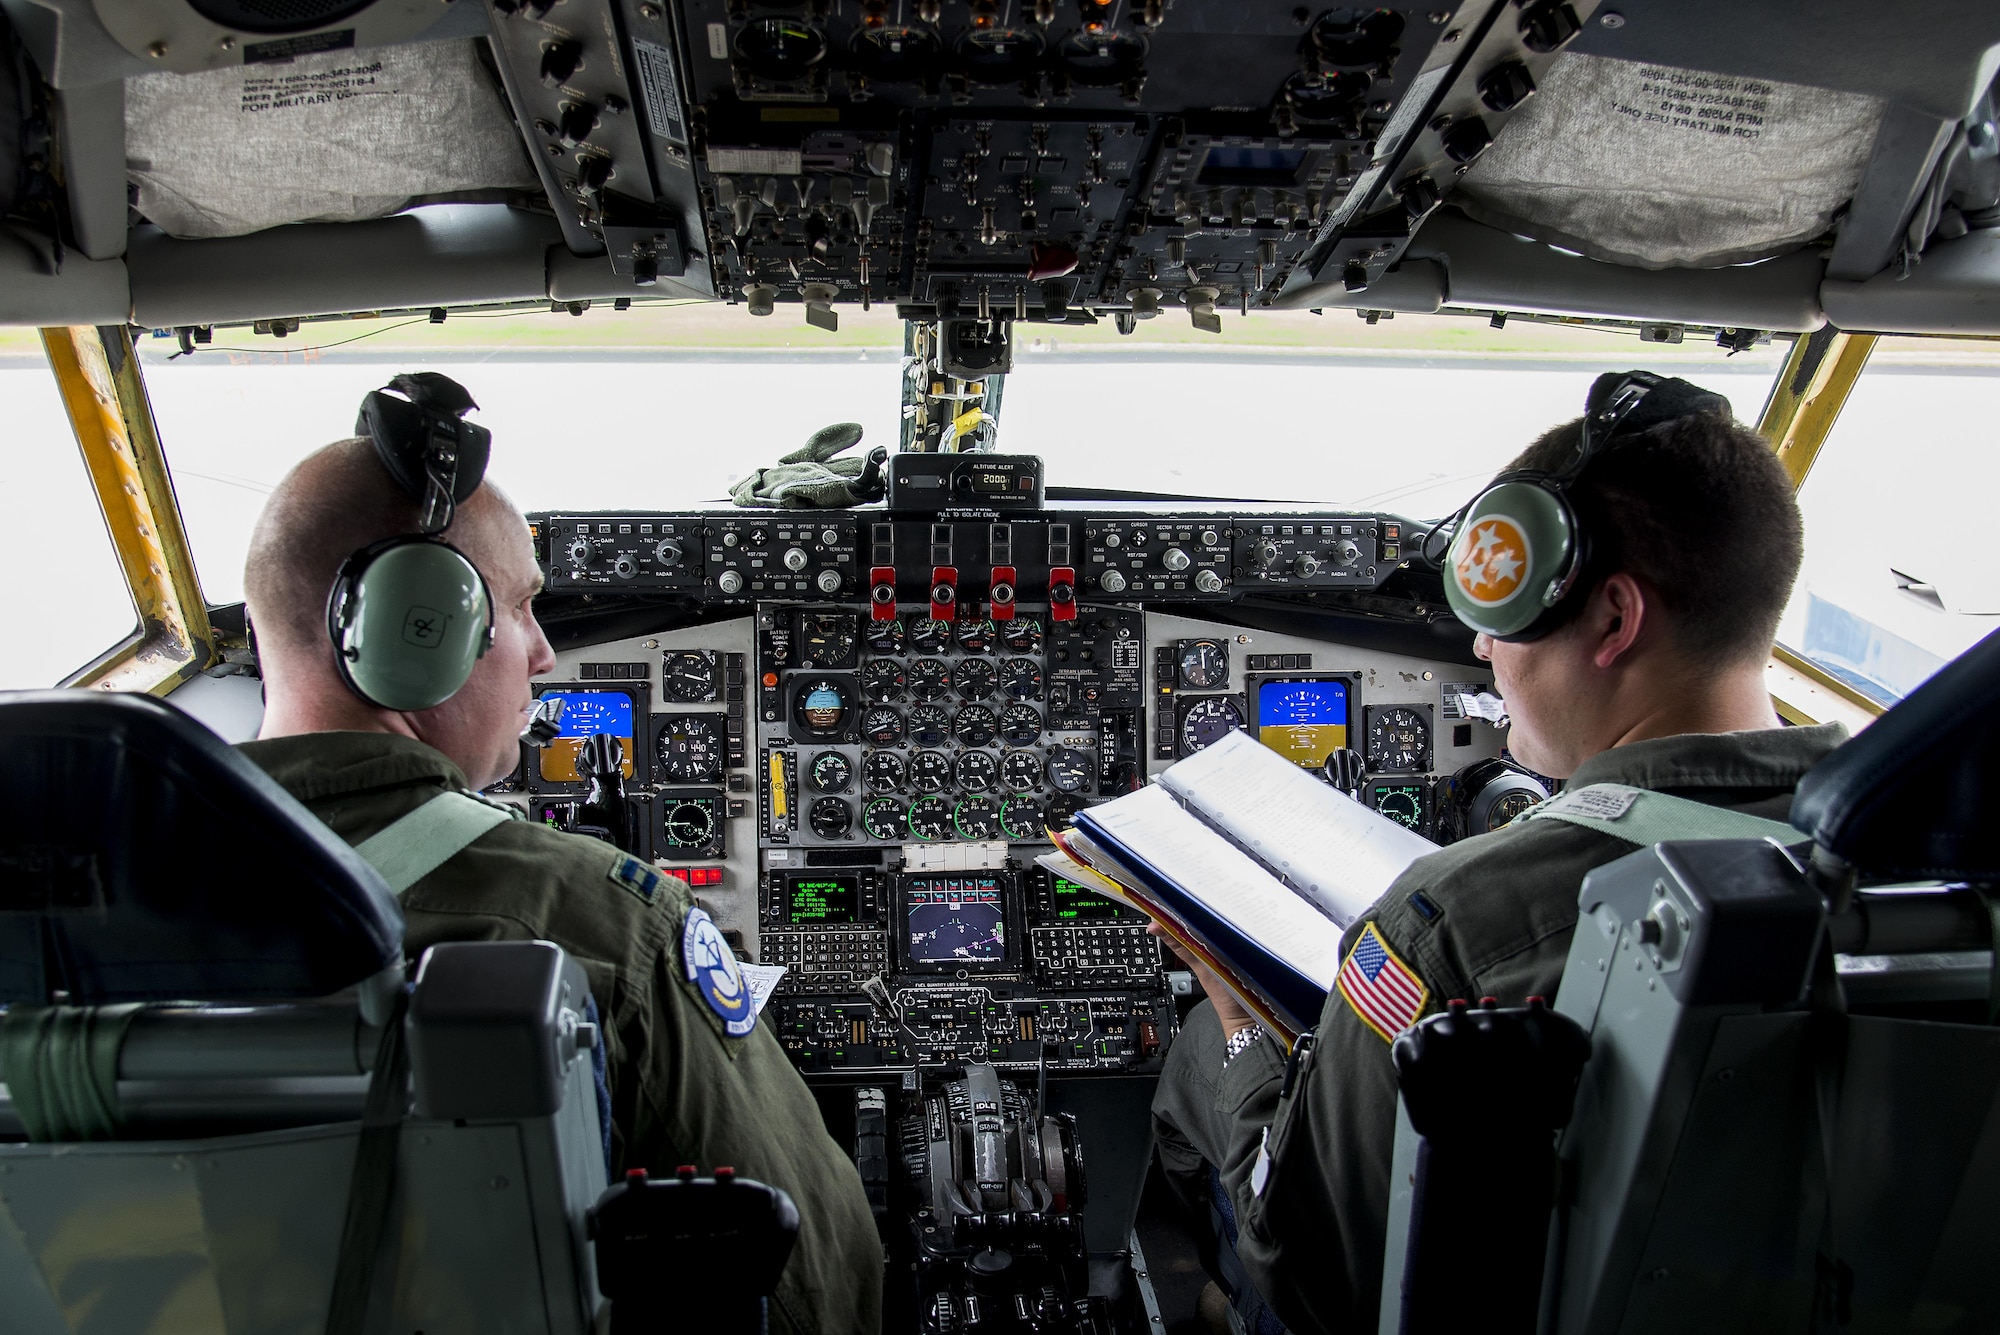 Captain Jeffrey Everett, 906th Air Refueling Squadron pilot, and 1st Lt. Ben Farr 906th ARS review a preflight checklist prior to a refueling mission June 3, 2016 at Scott Air Force Base, Illinois. The mission was a training sortie focusing on maintain aircrew readiness in conjunction with the 115th Fighter Wing of the Wisconsin Air National Guard. (U.S. Air Force Photo by Airman Daniel Garcia)